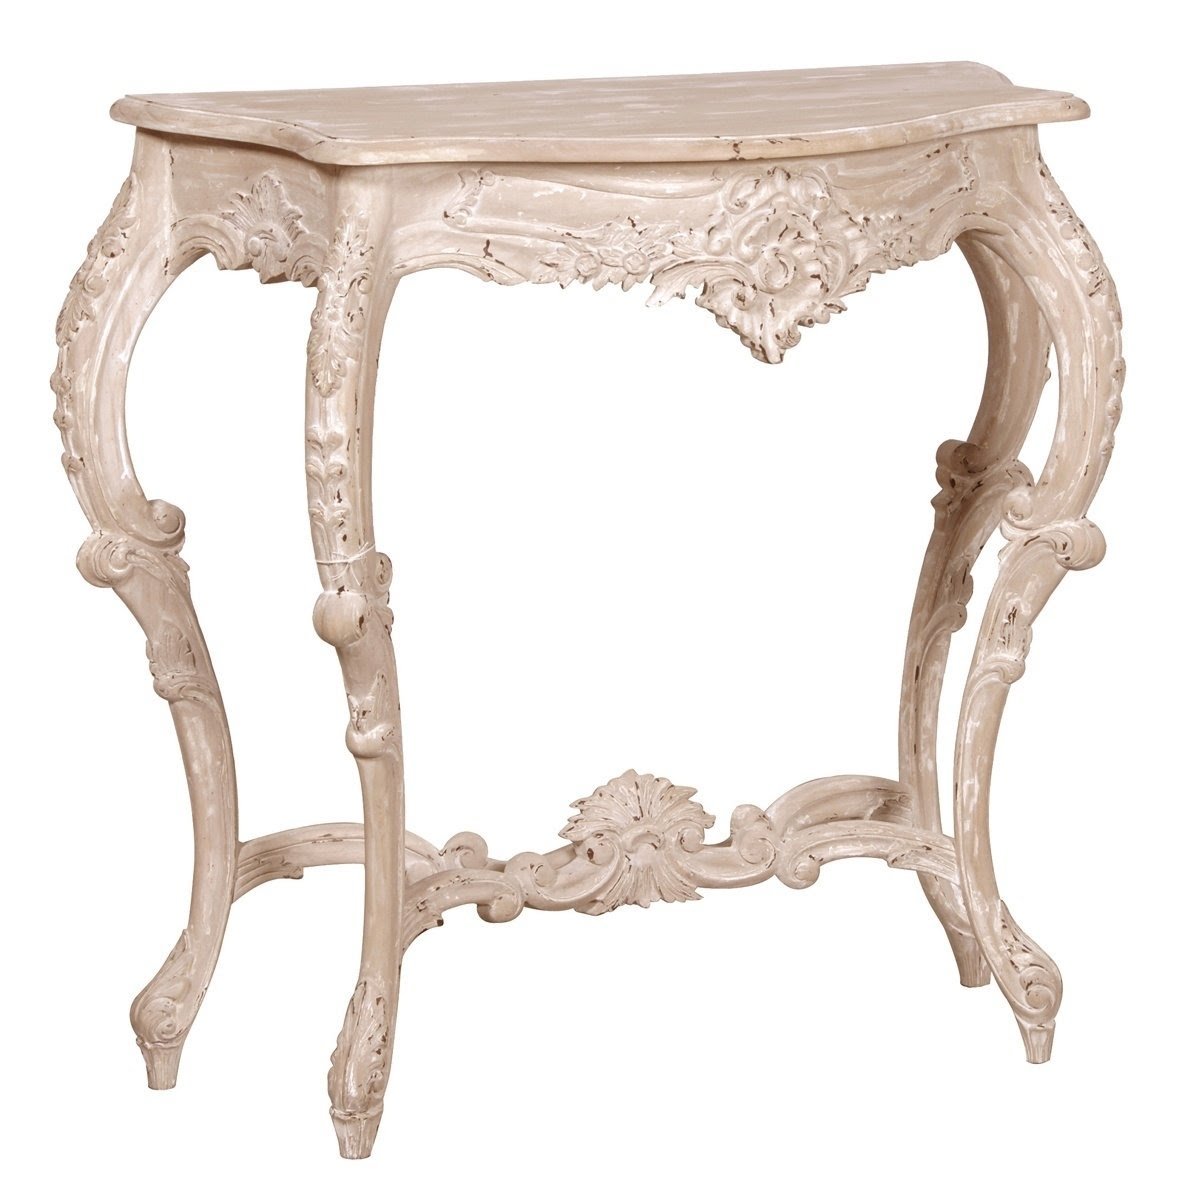 Amari Leisure Devon Cream Painted 2 Drawer Console Table in Shabby Chic Ornate French Style